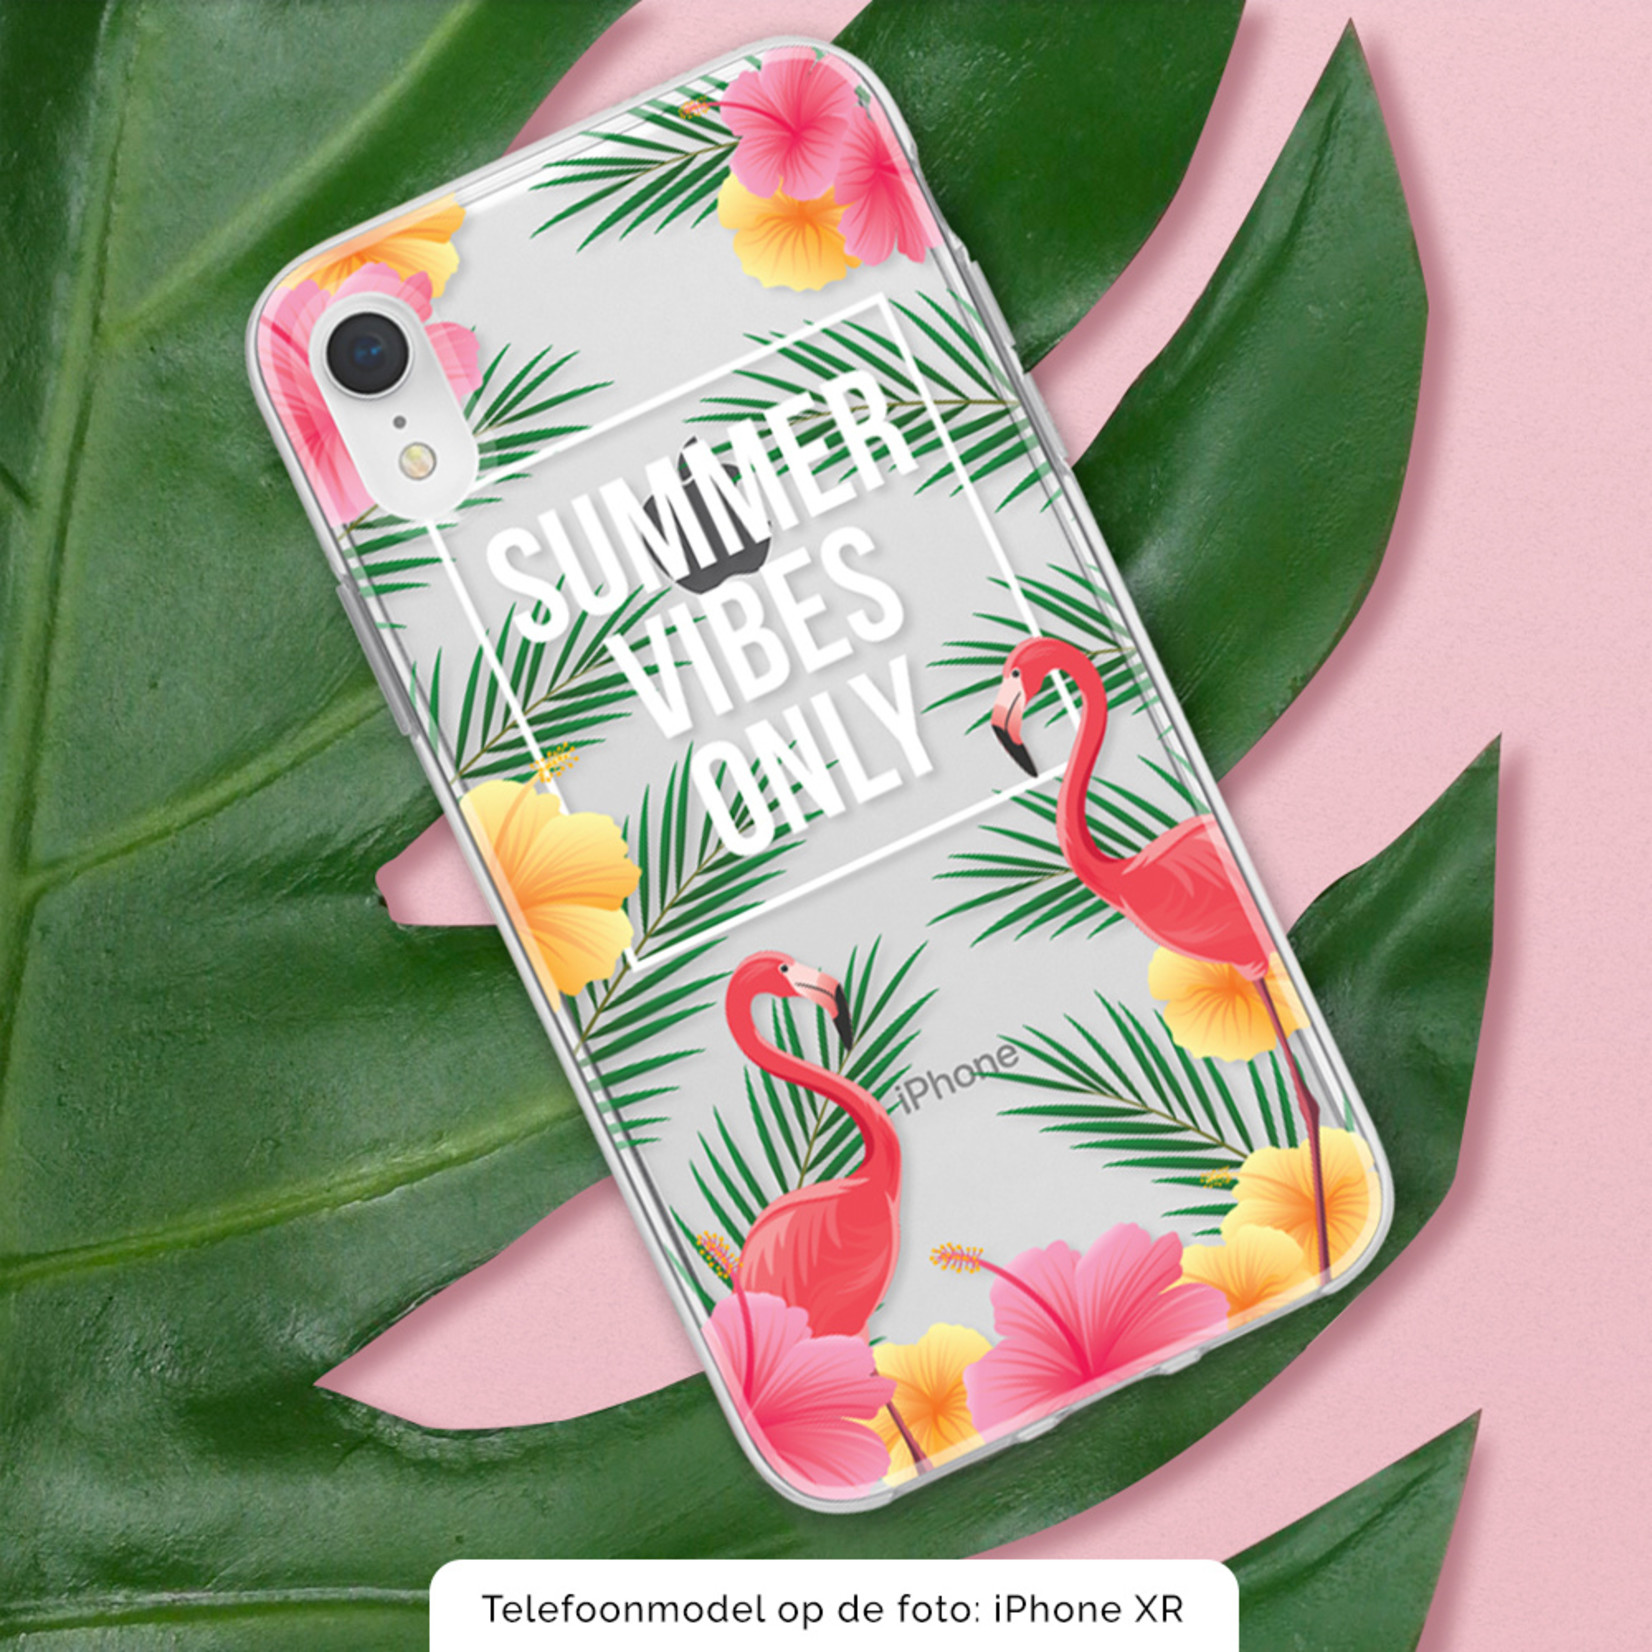 FOONCASE Iphone XS Max Cover - Summer Vibes Only